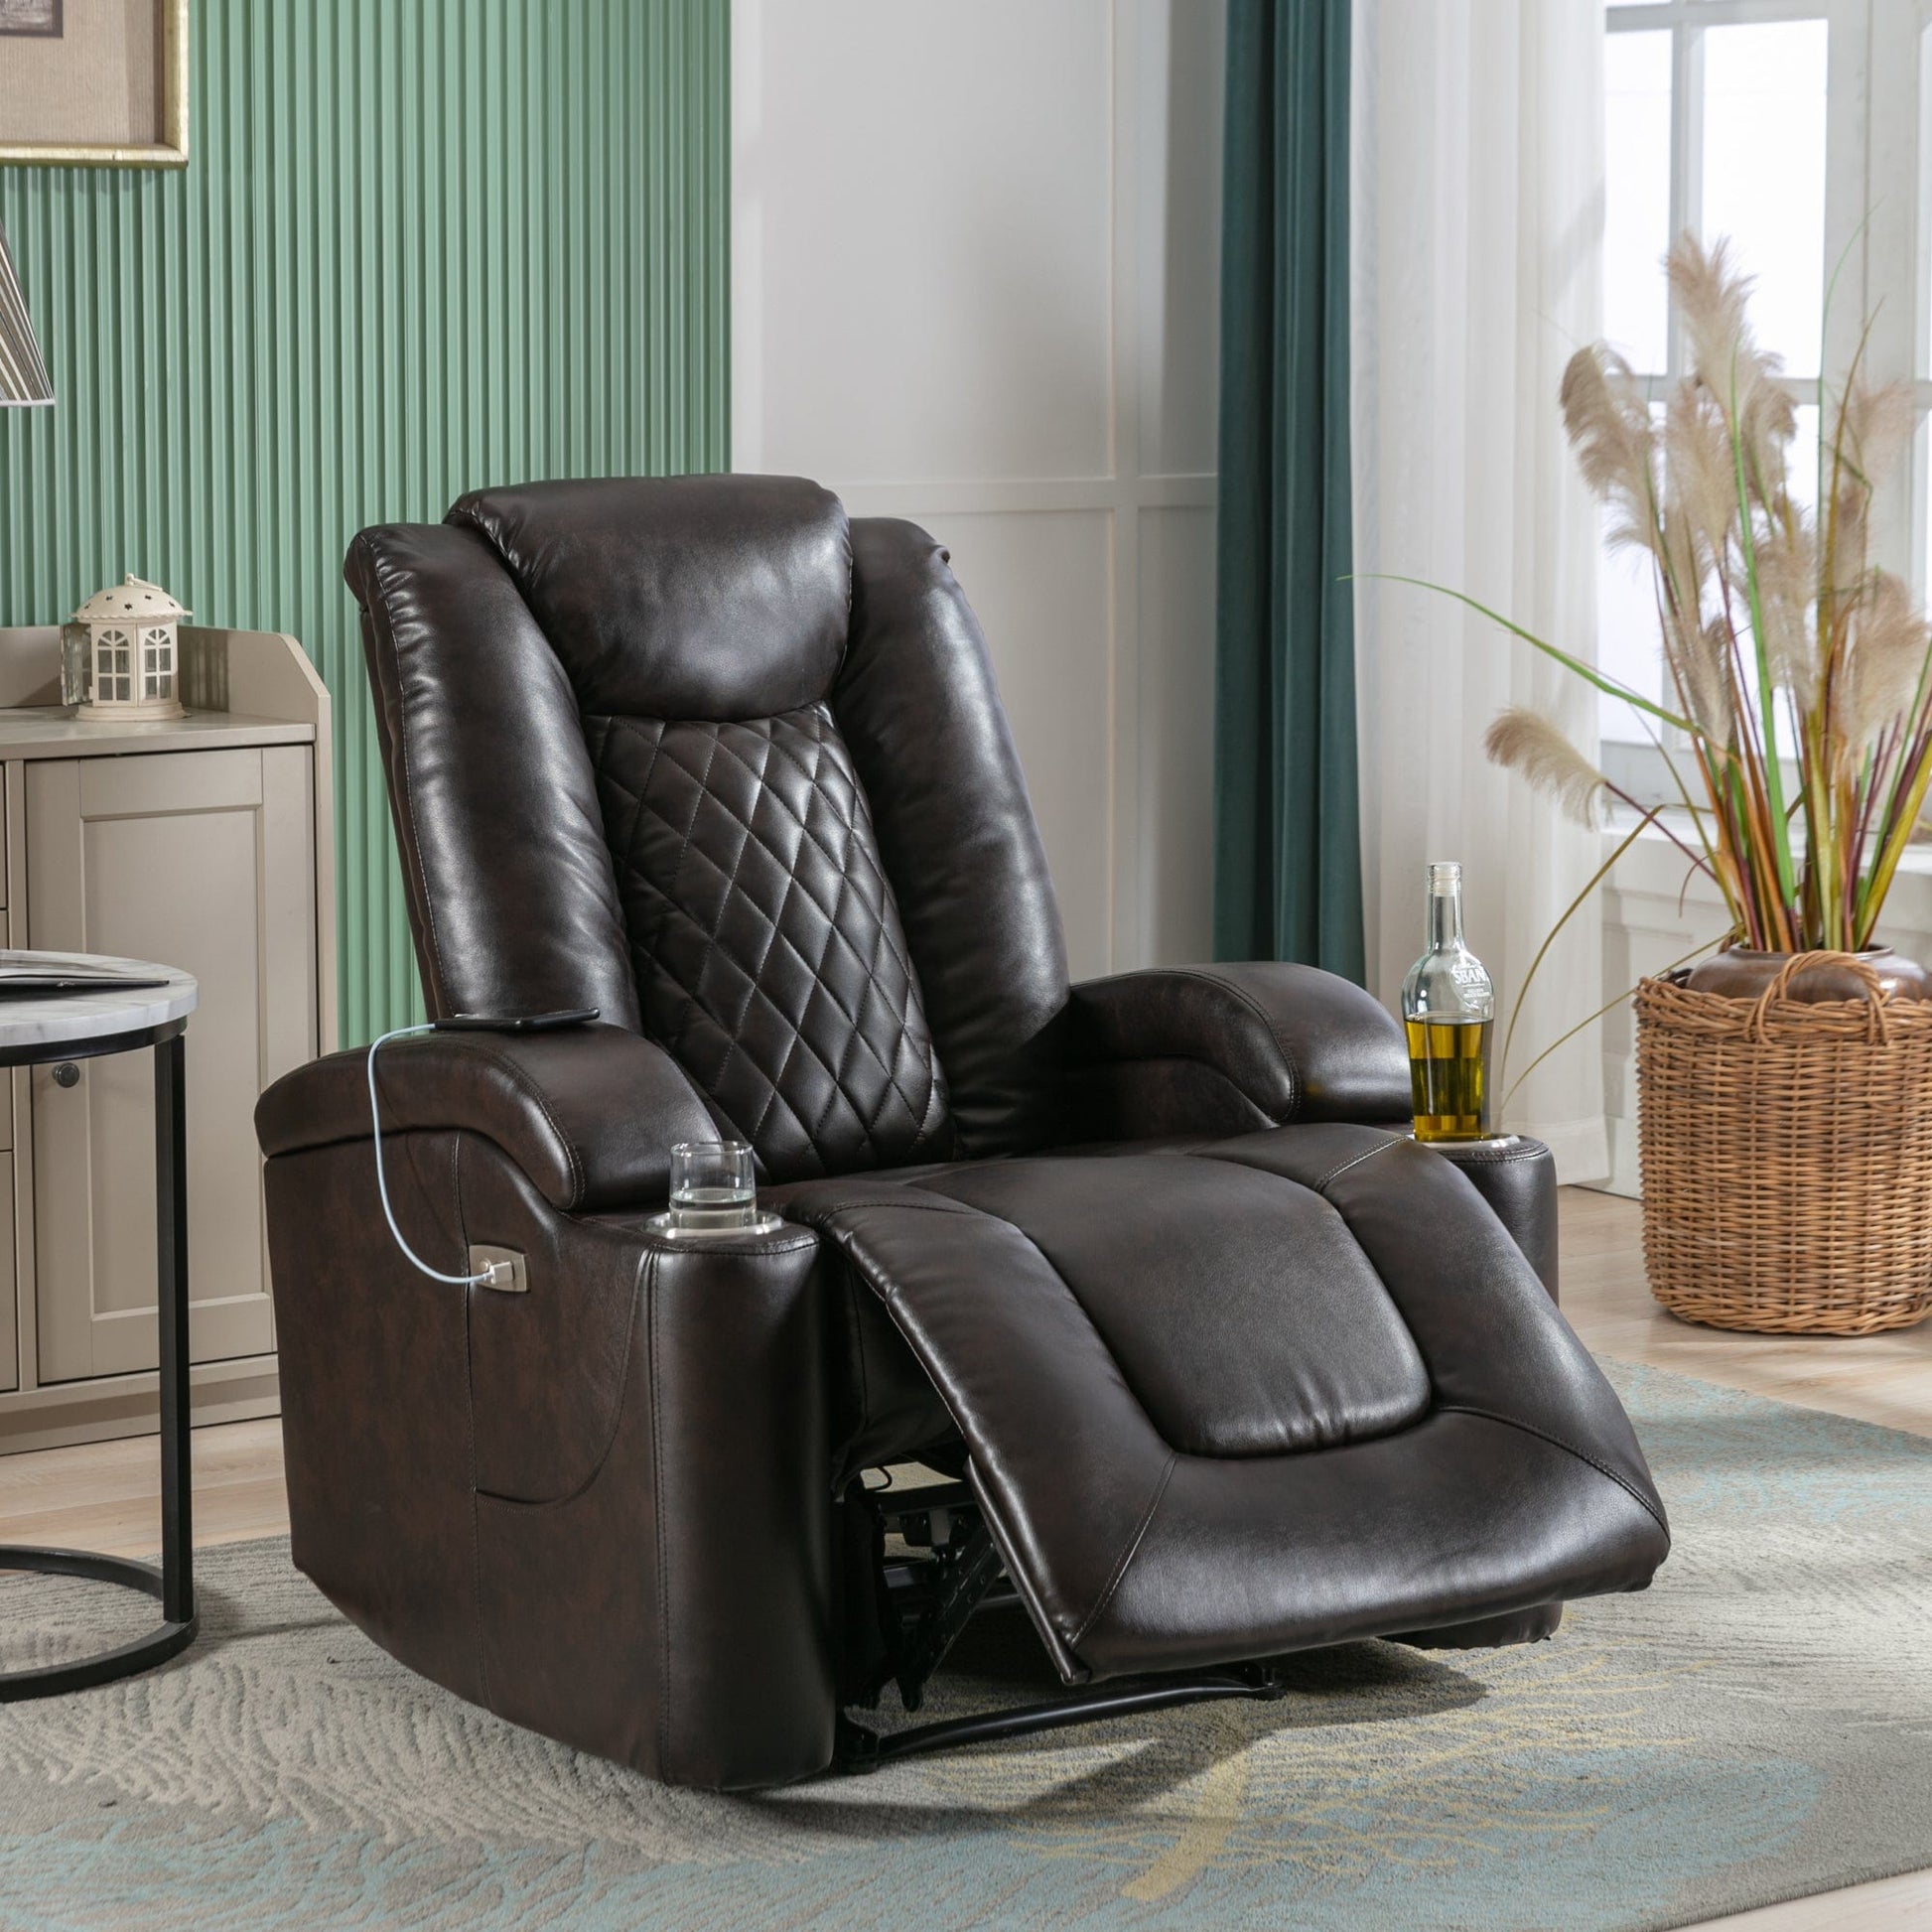 1st Choice Furniture Direct Power Motion Recliner 1st Choice Modern Power Motion Recliner with USB Port in Brown Finish